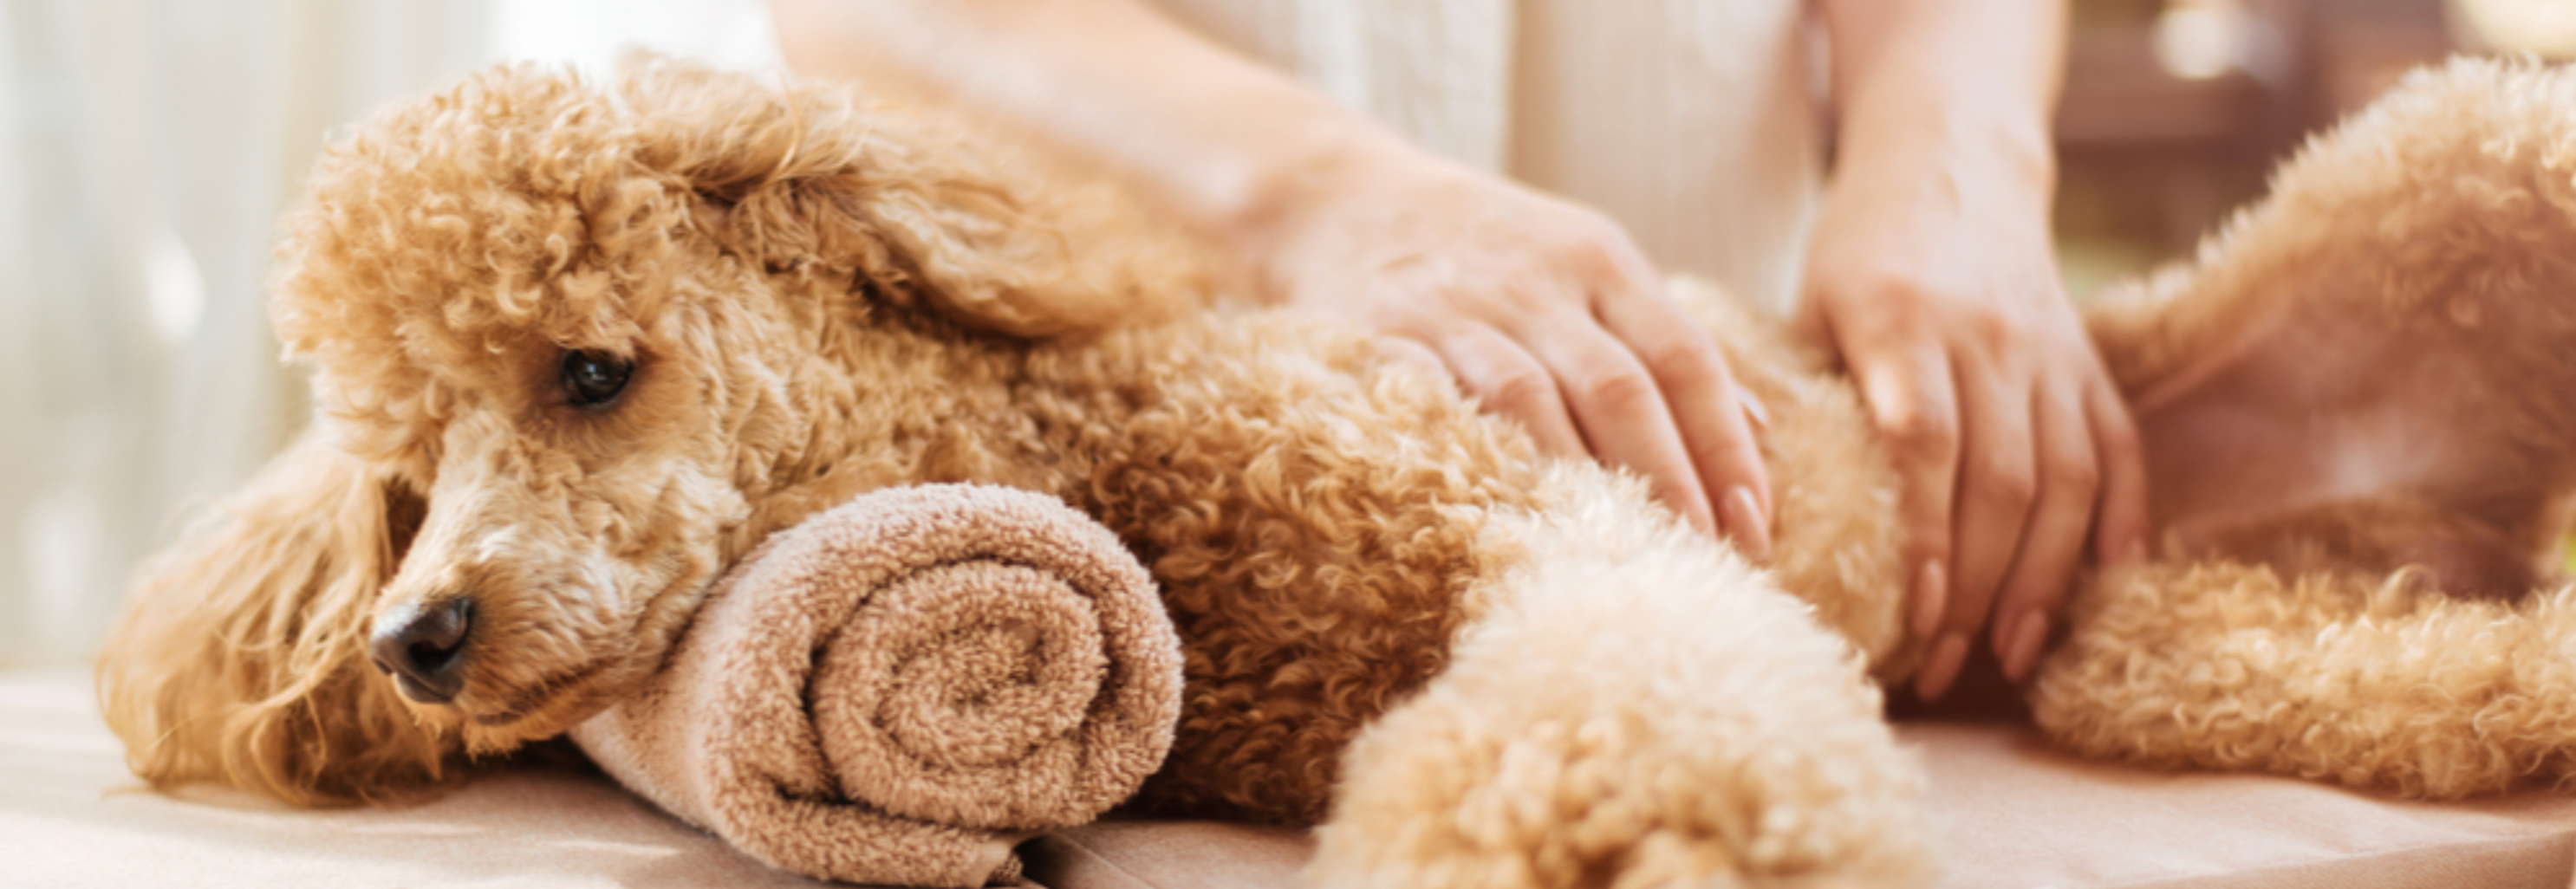 Pamper Your Pooch: The Benefits and Basics of Dog Massage